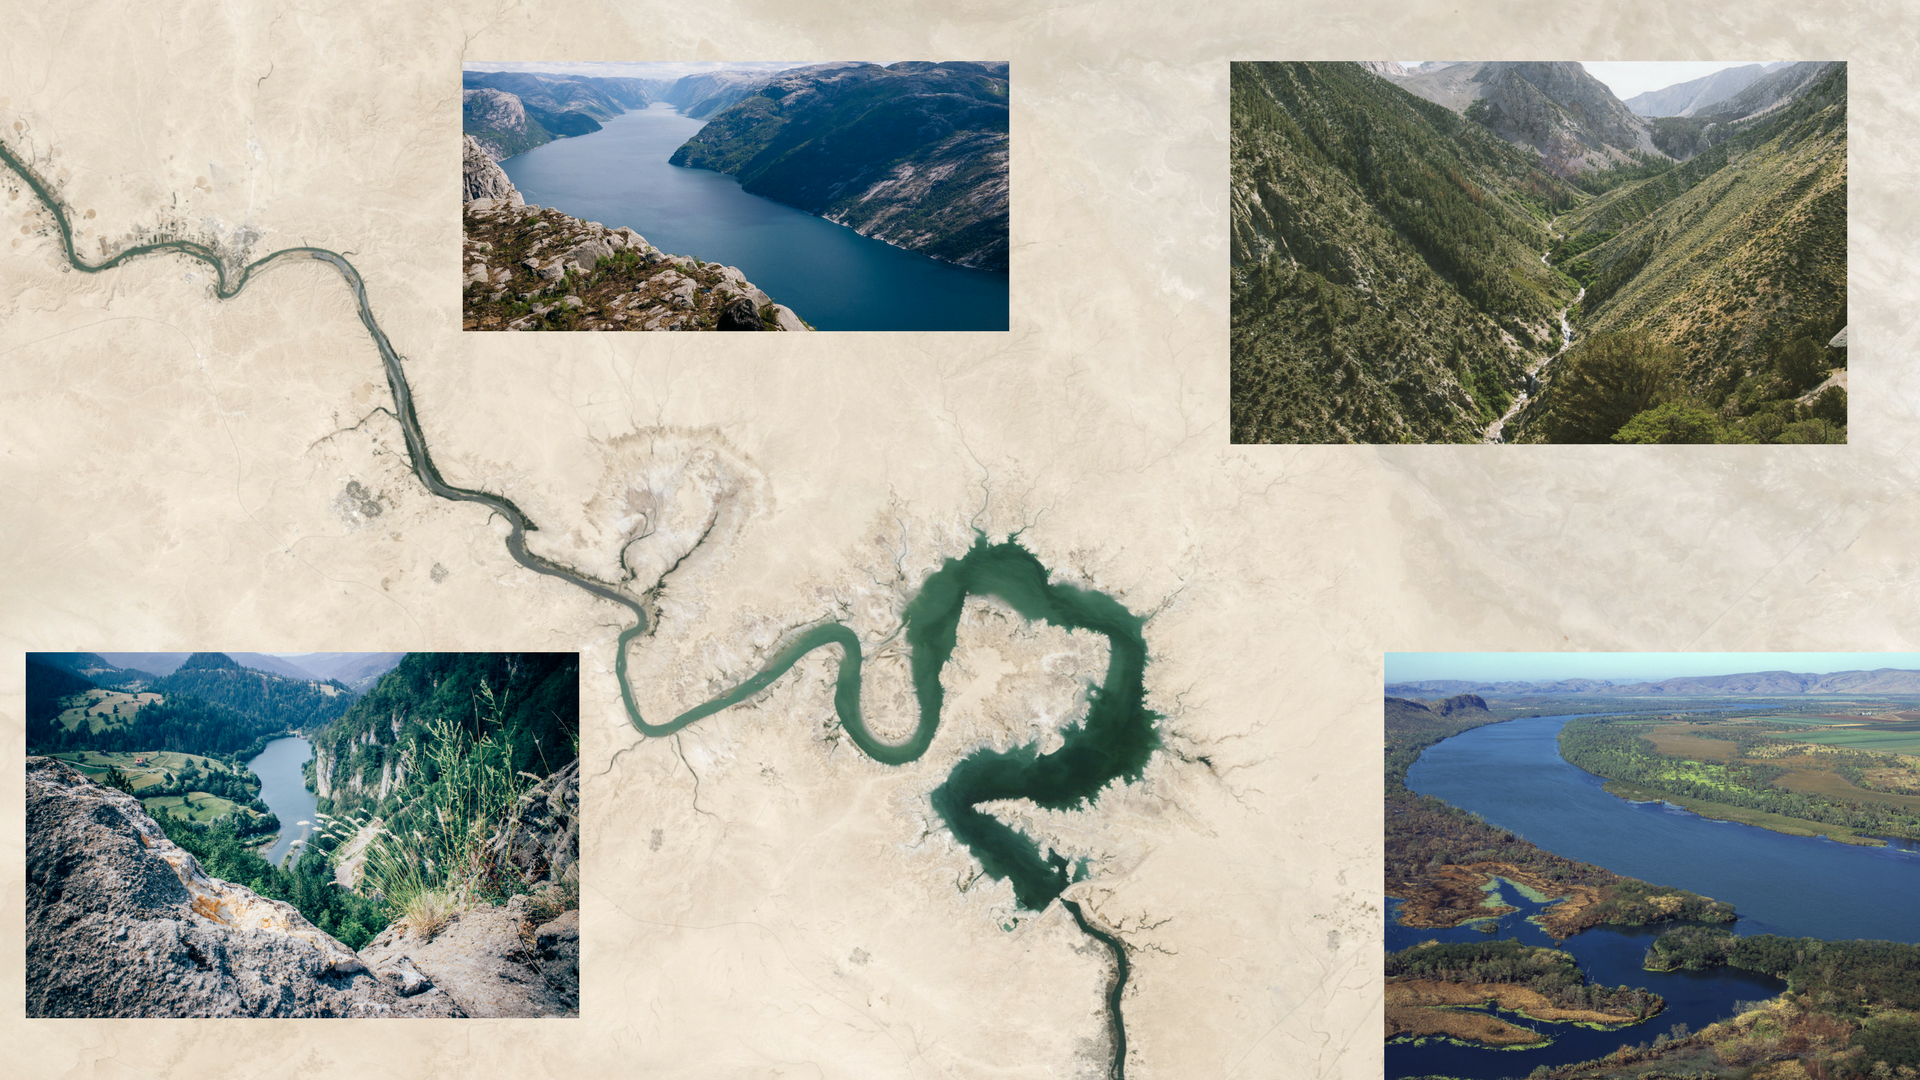 Watershed depicted by remote sensing in the center and as seen in real from side images